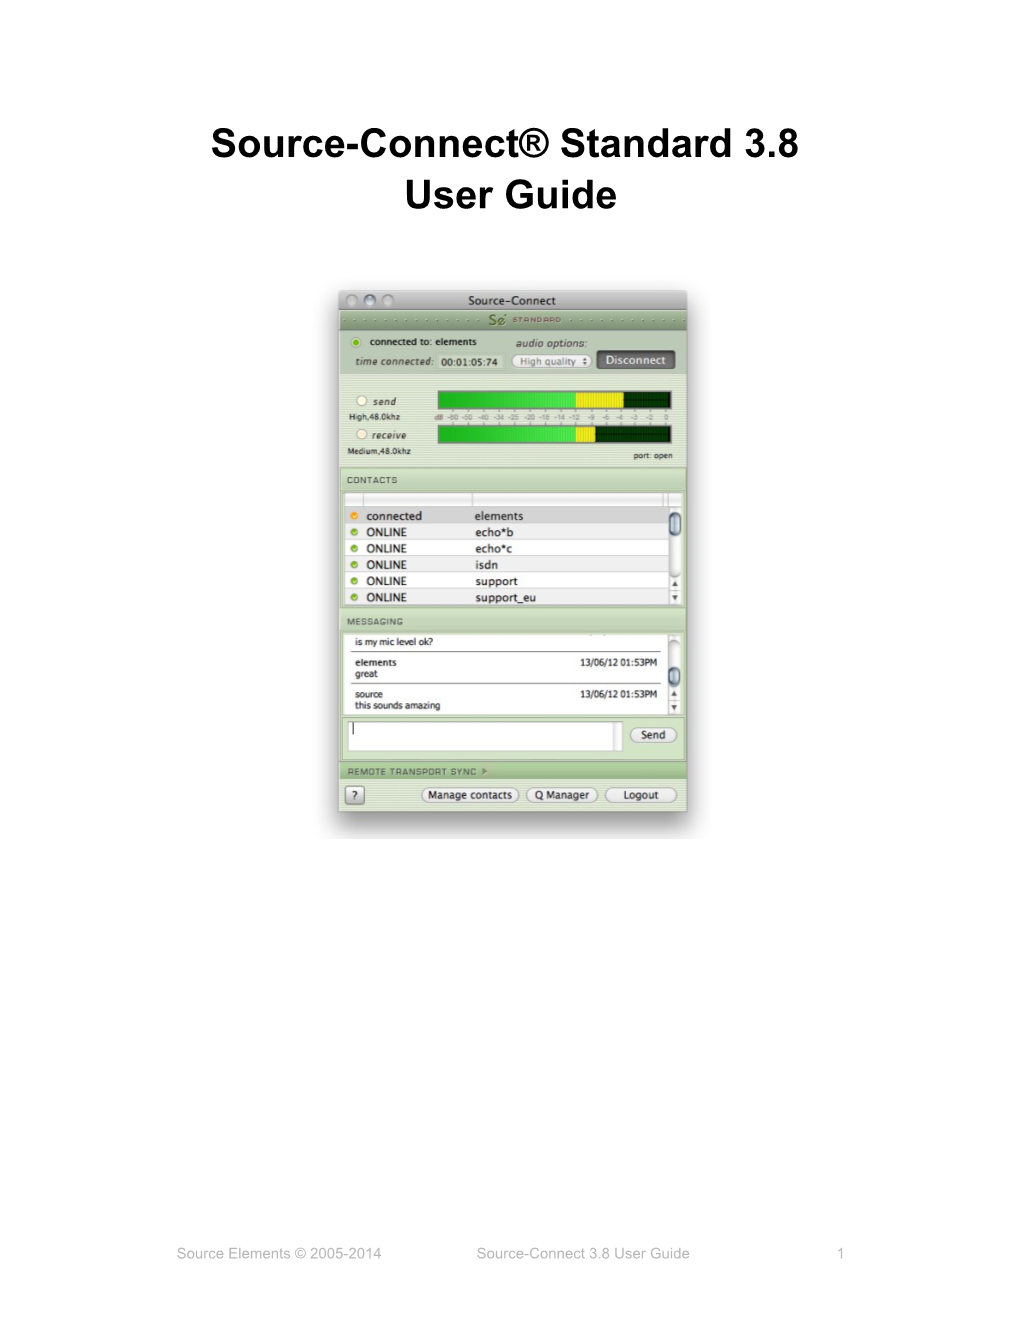 Source-Connect® Standard 3.8 User Guide